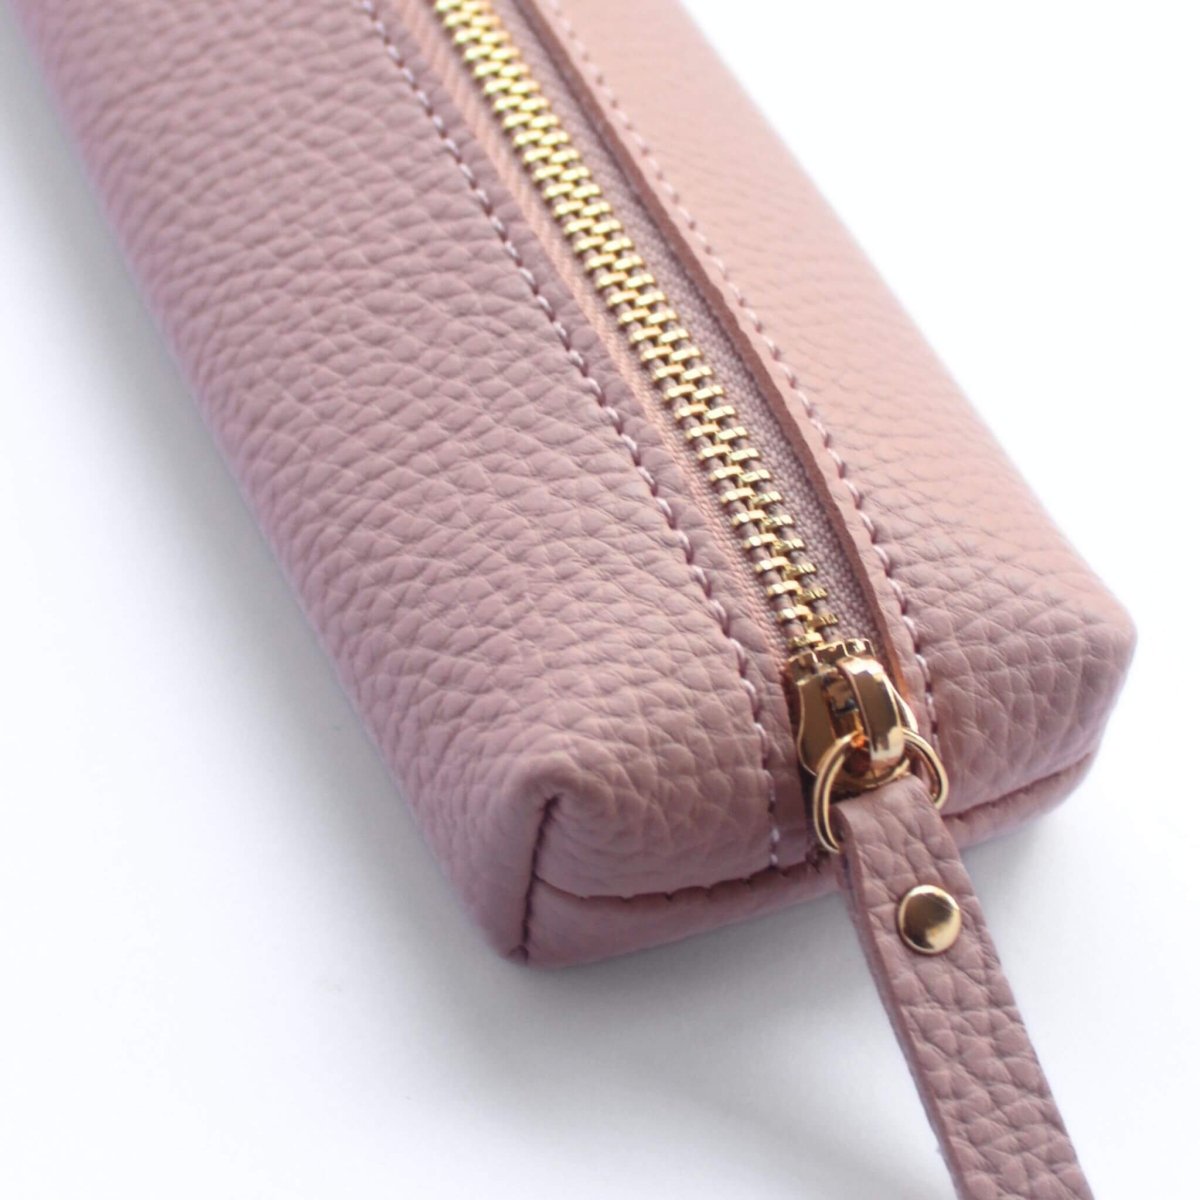 Small pink pencil case close up of gold zip